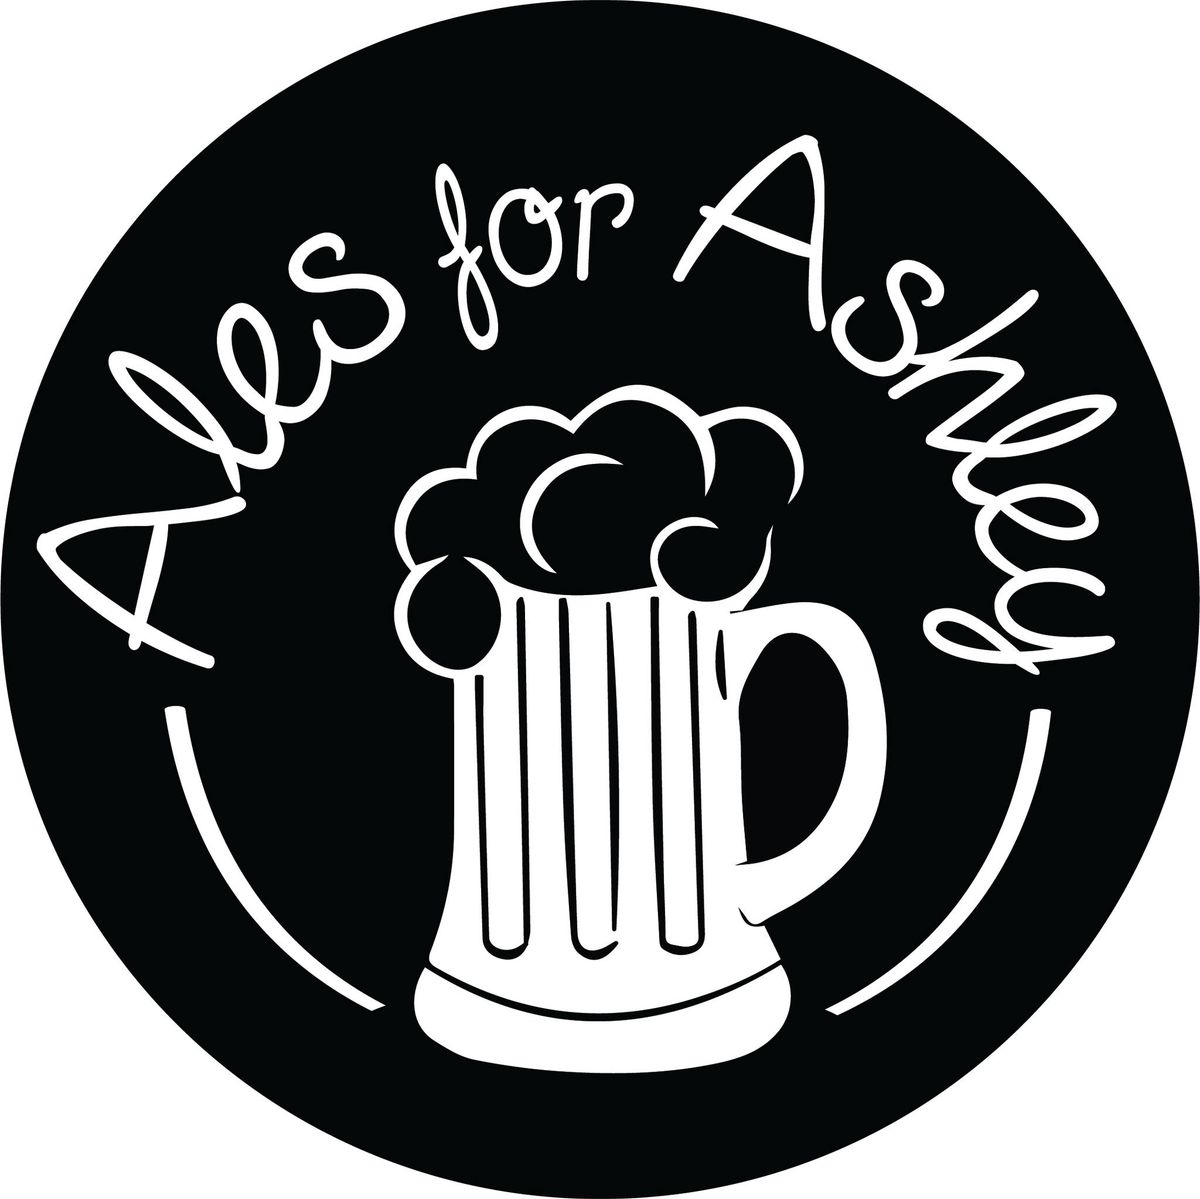 Ales for Ashley Hendersonville, NC - A Fundraiser for Brain Cancer 